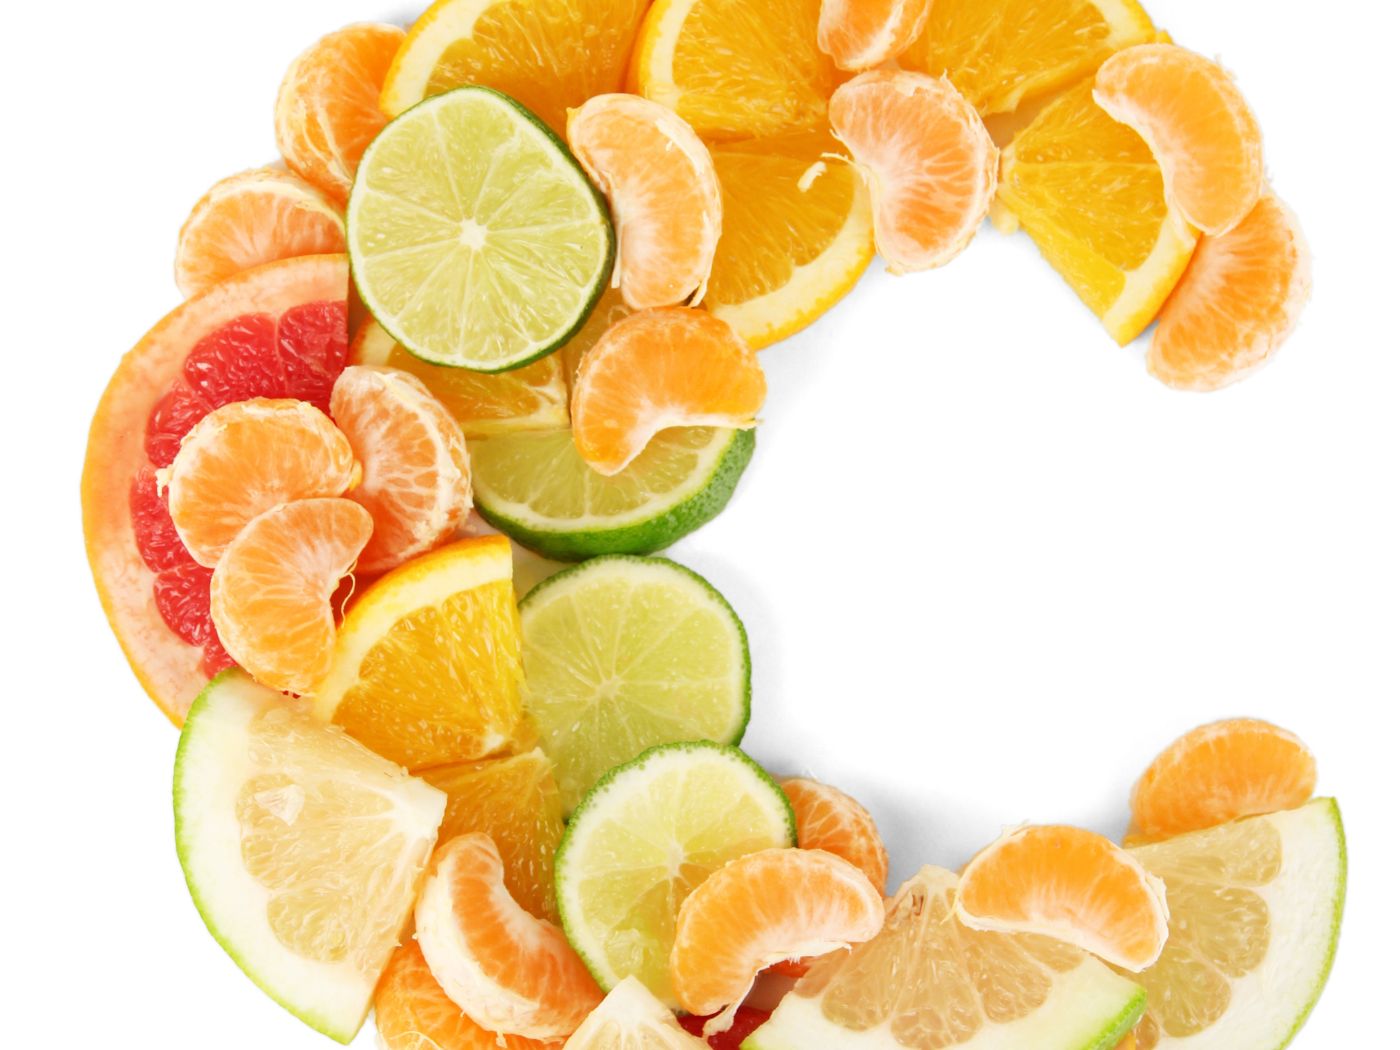 Vitamin C: All the Benefits and Side-Effects You Need to Know